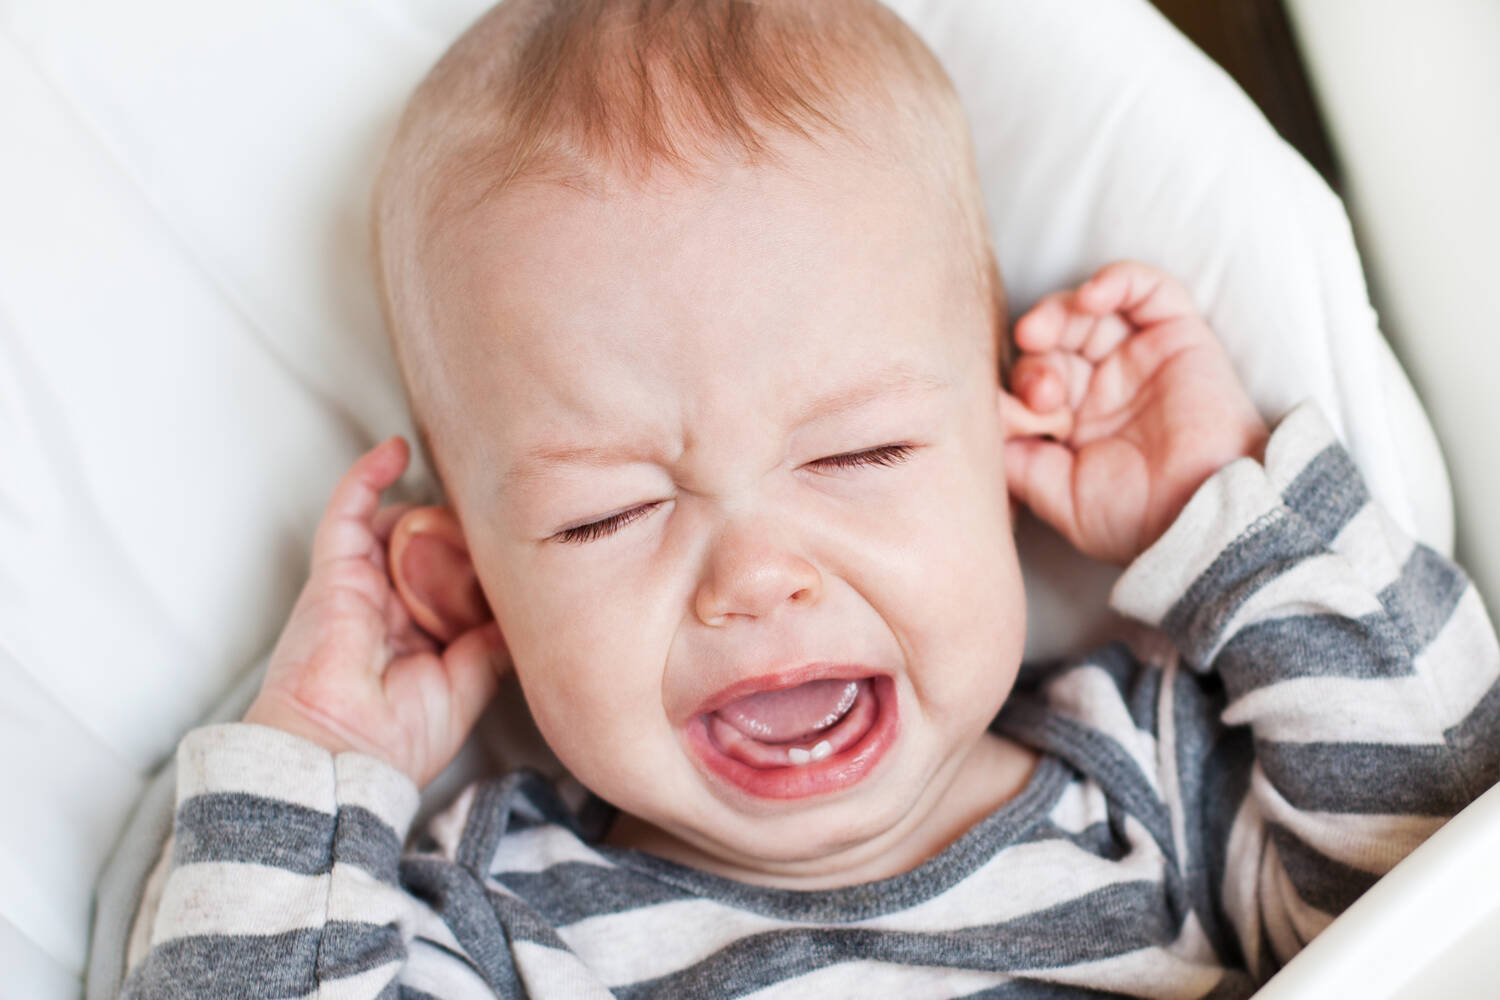 A toddler pulling at his ears in pain